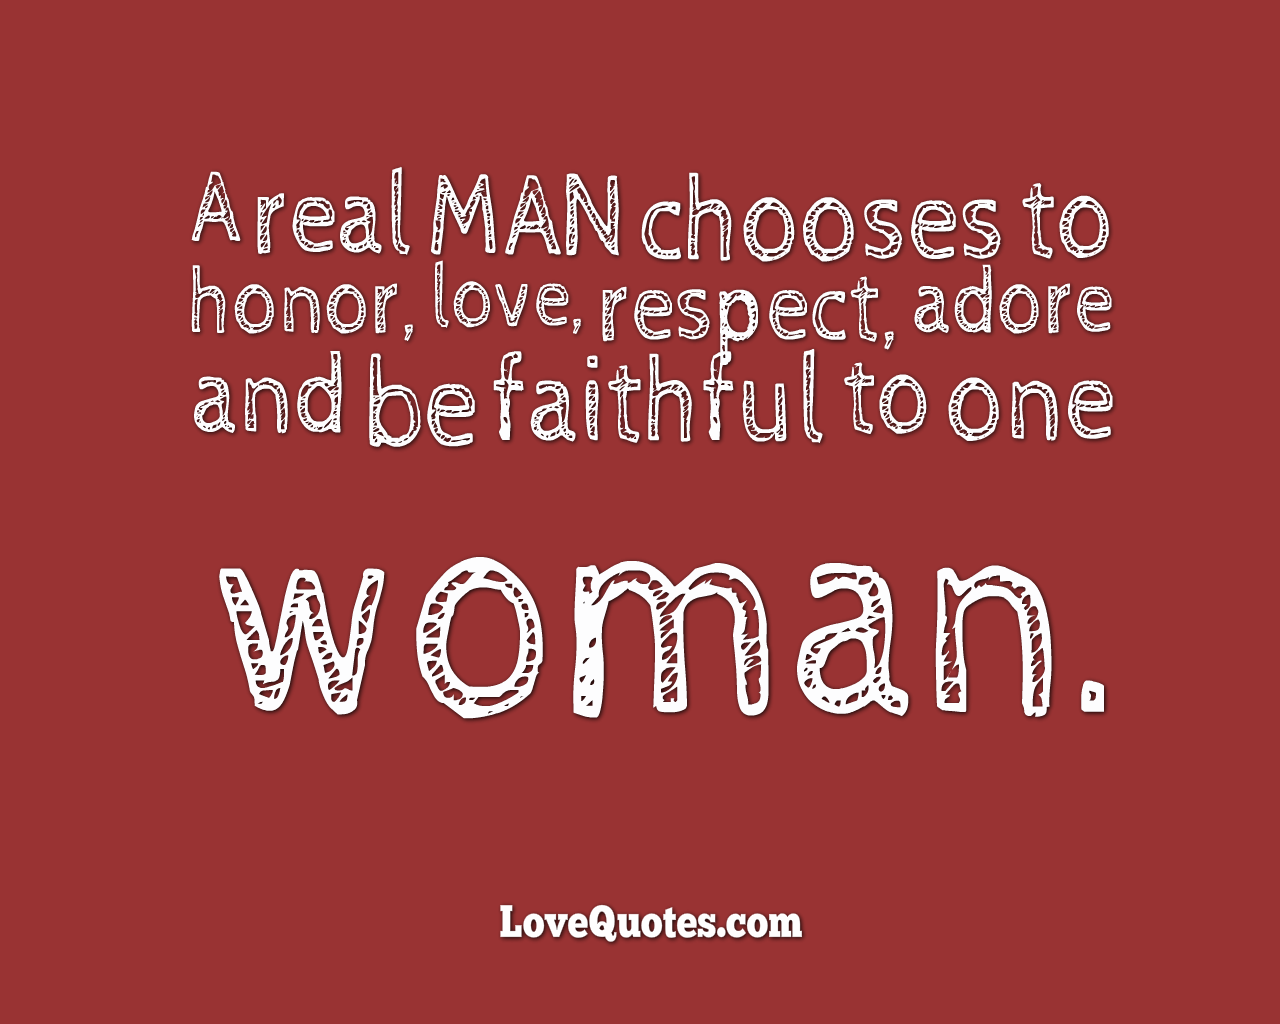 A Real Man - Love Quotes